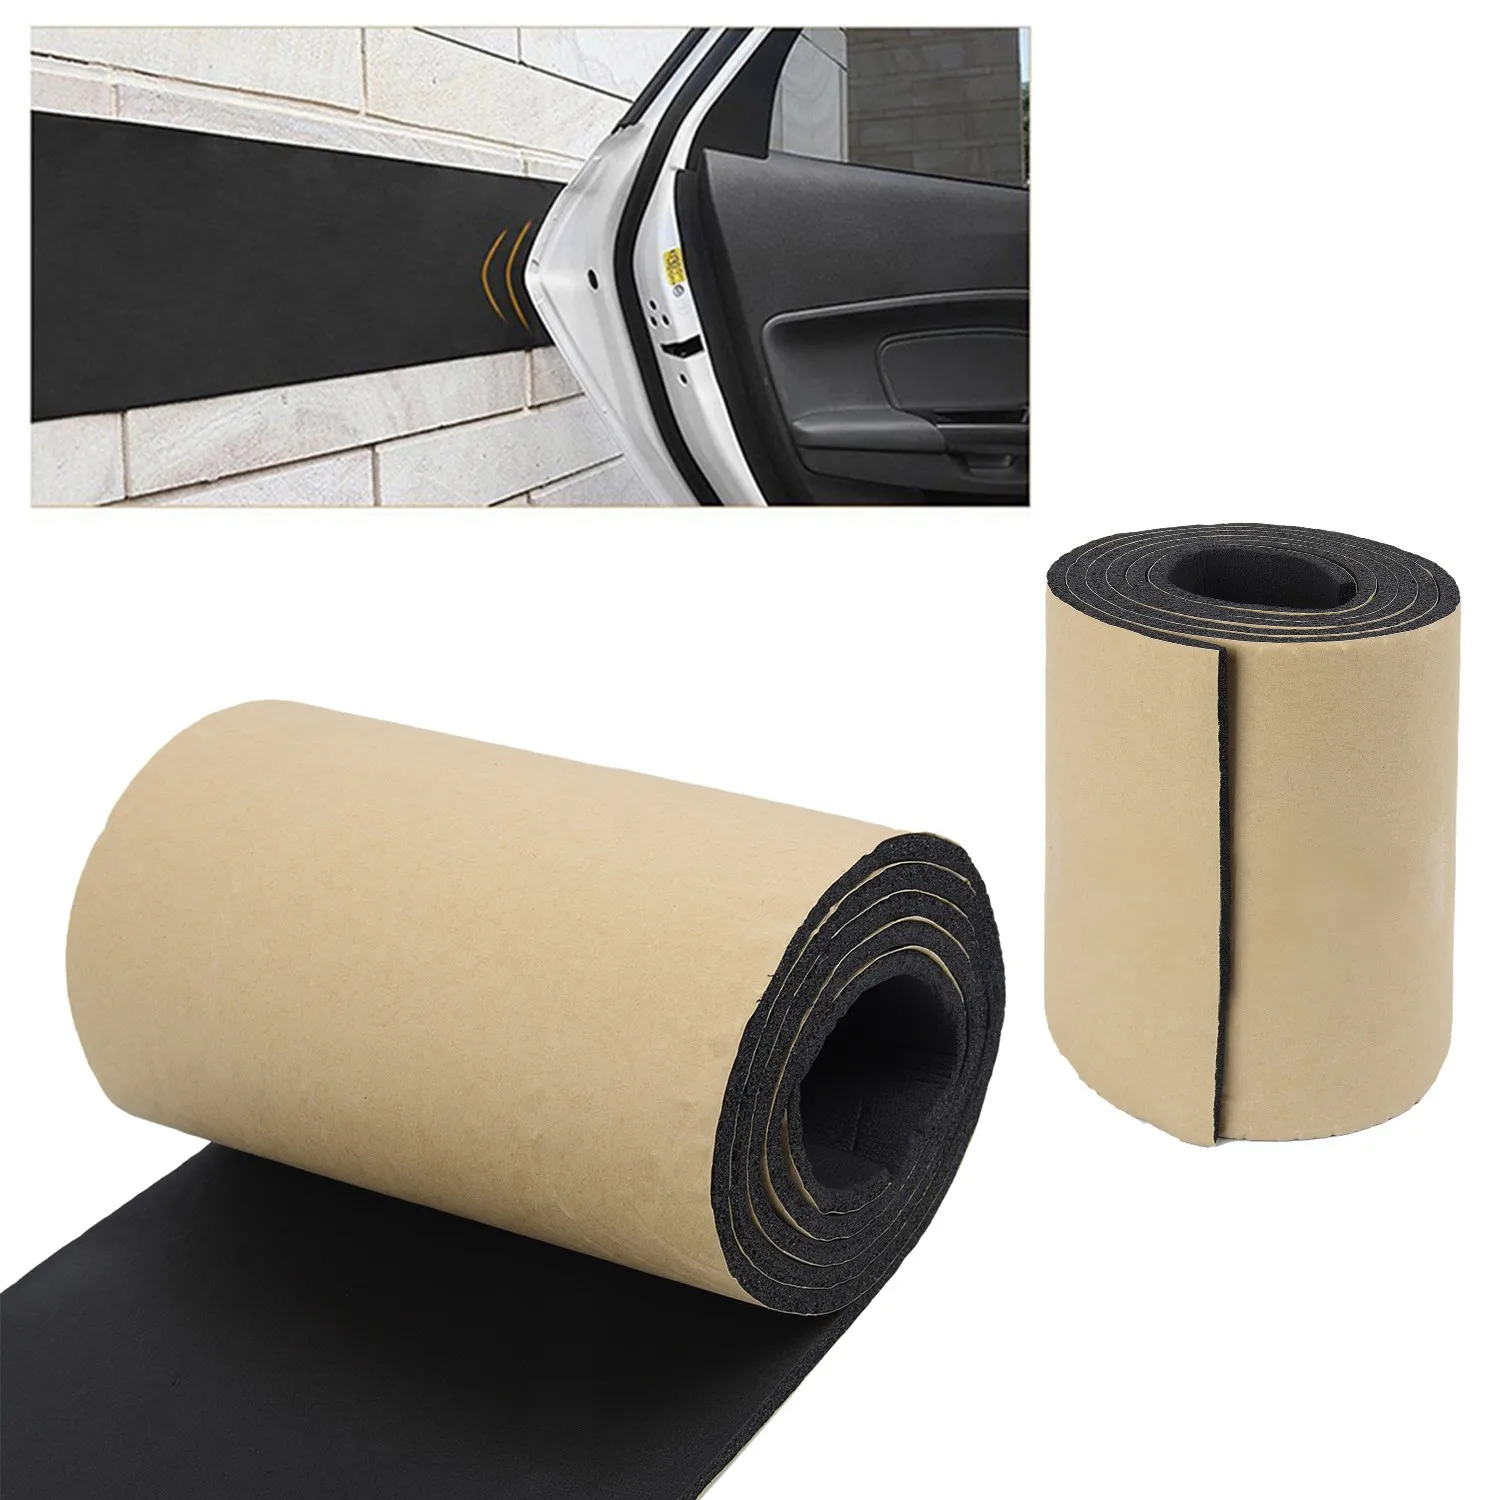 

50*20cm 6mm Car Door Protector Garage Rubber Wall Guard Bumper Safety Parking Anti-collision Glue Protective Film Exterior Parts